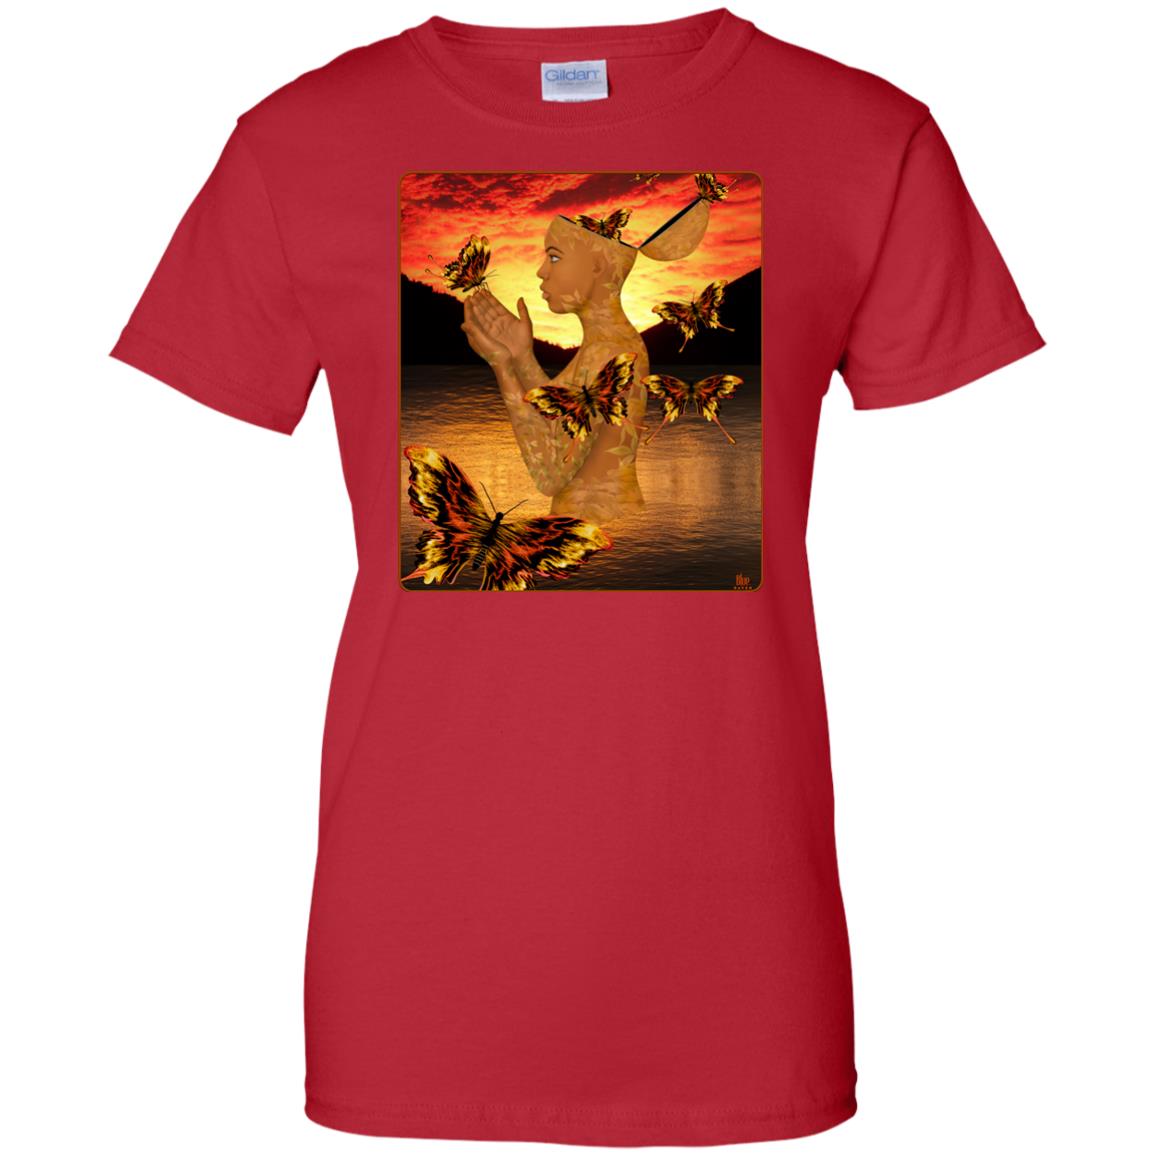 Mother Earth - Women's Relaxed Fit T-Shirt